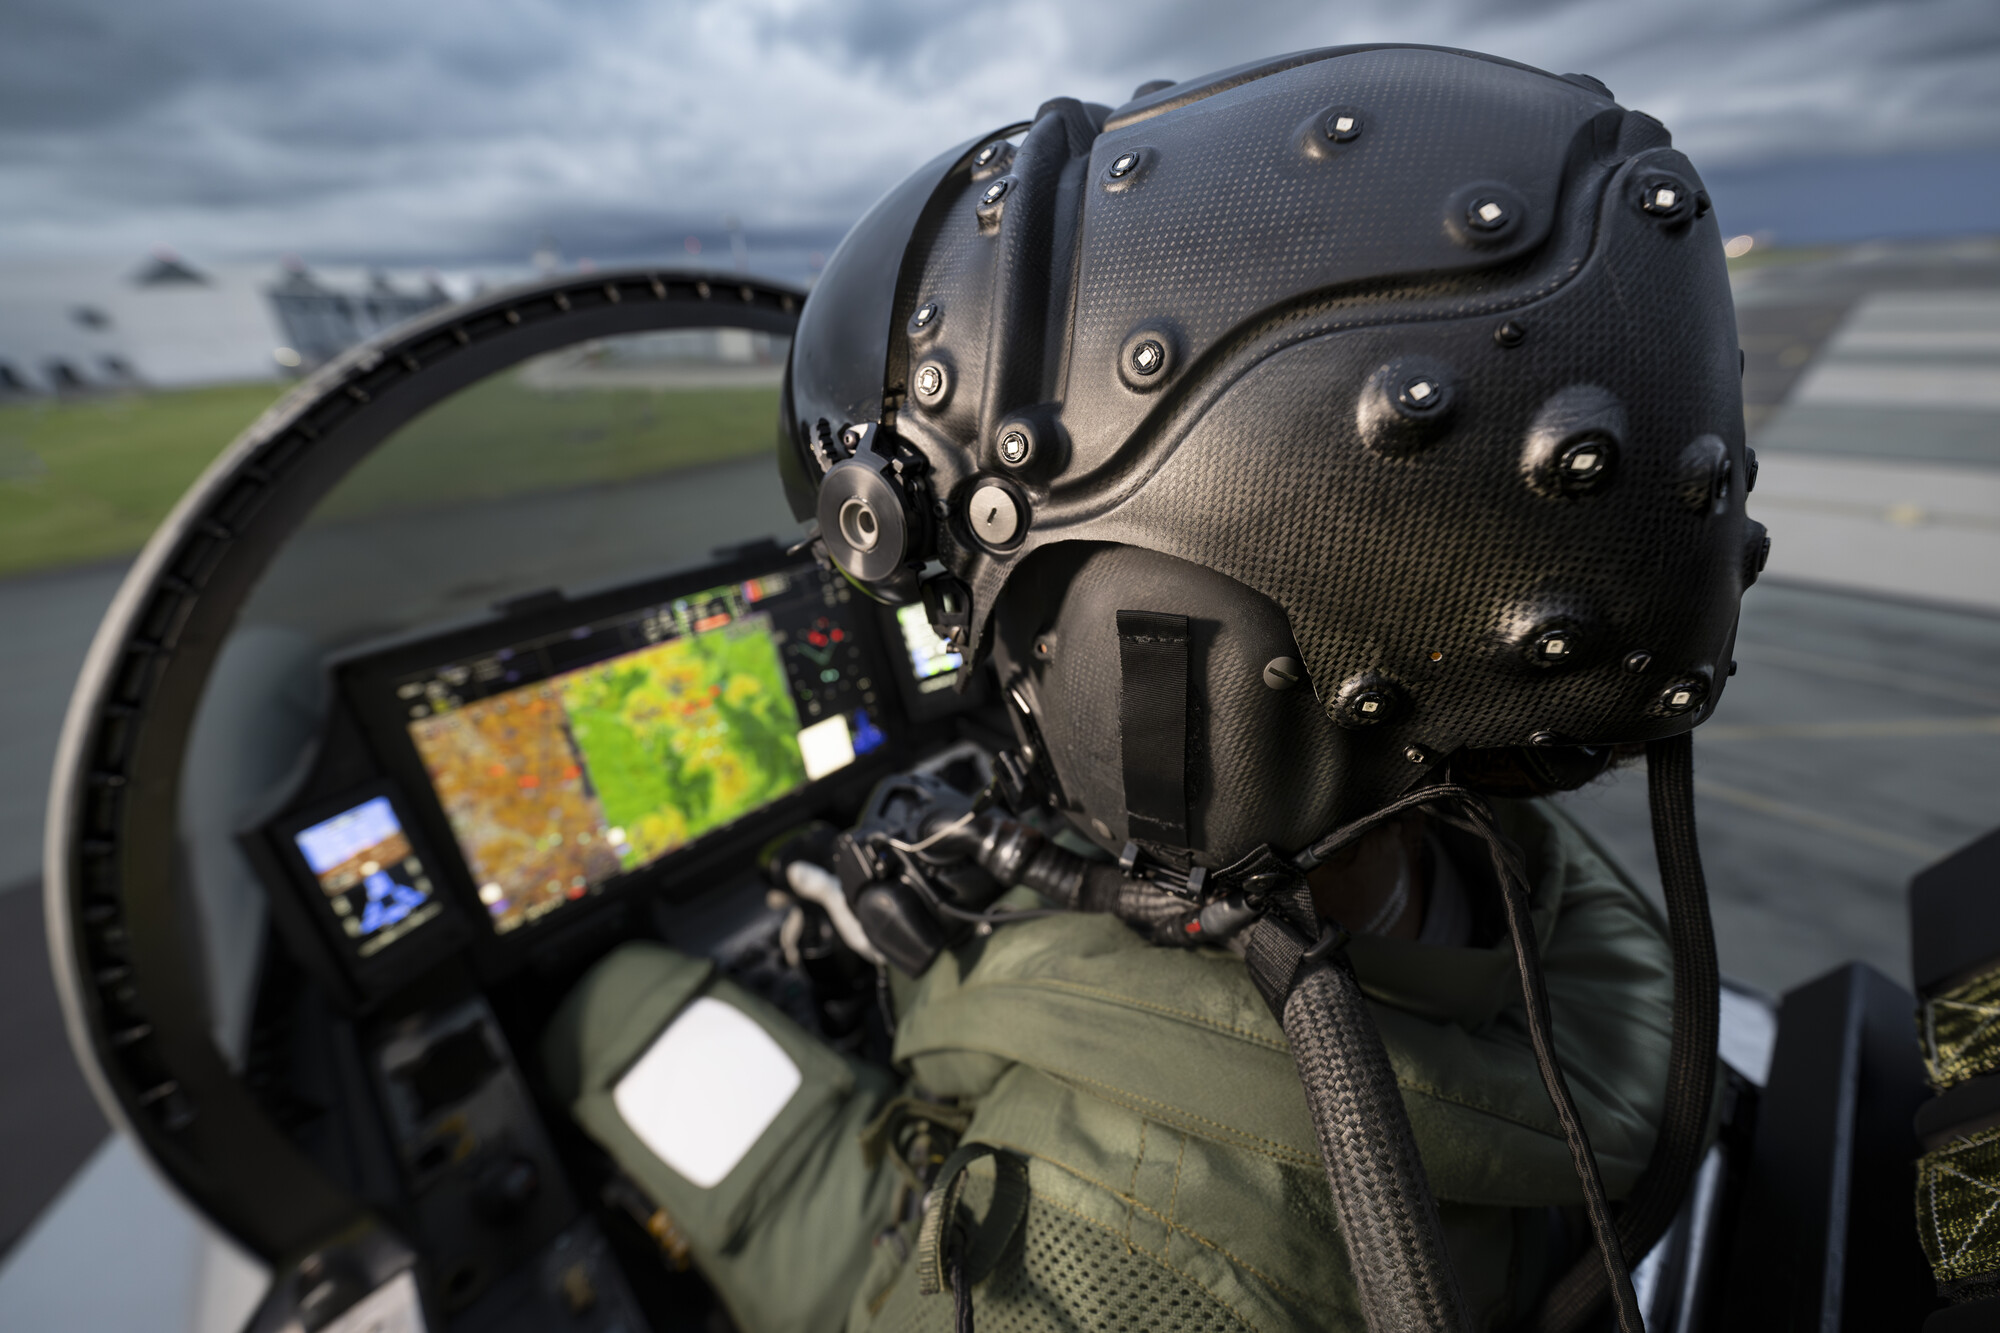 Image shows pilot from the back wearing helmet